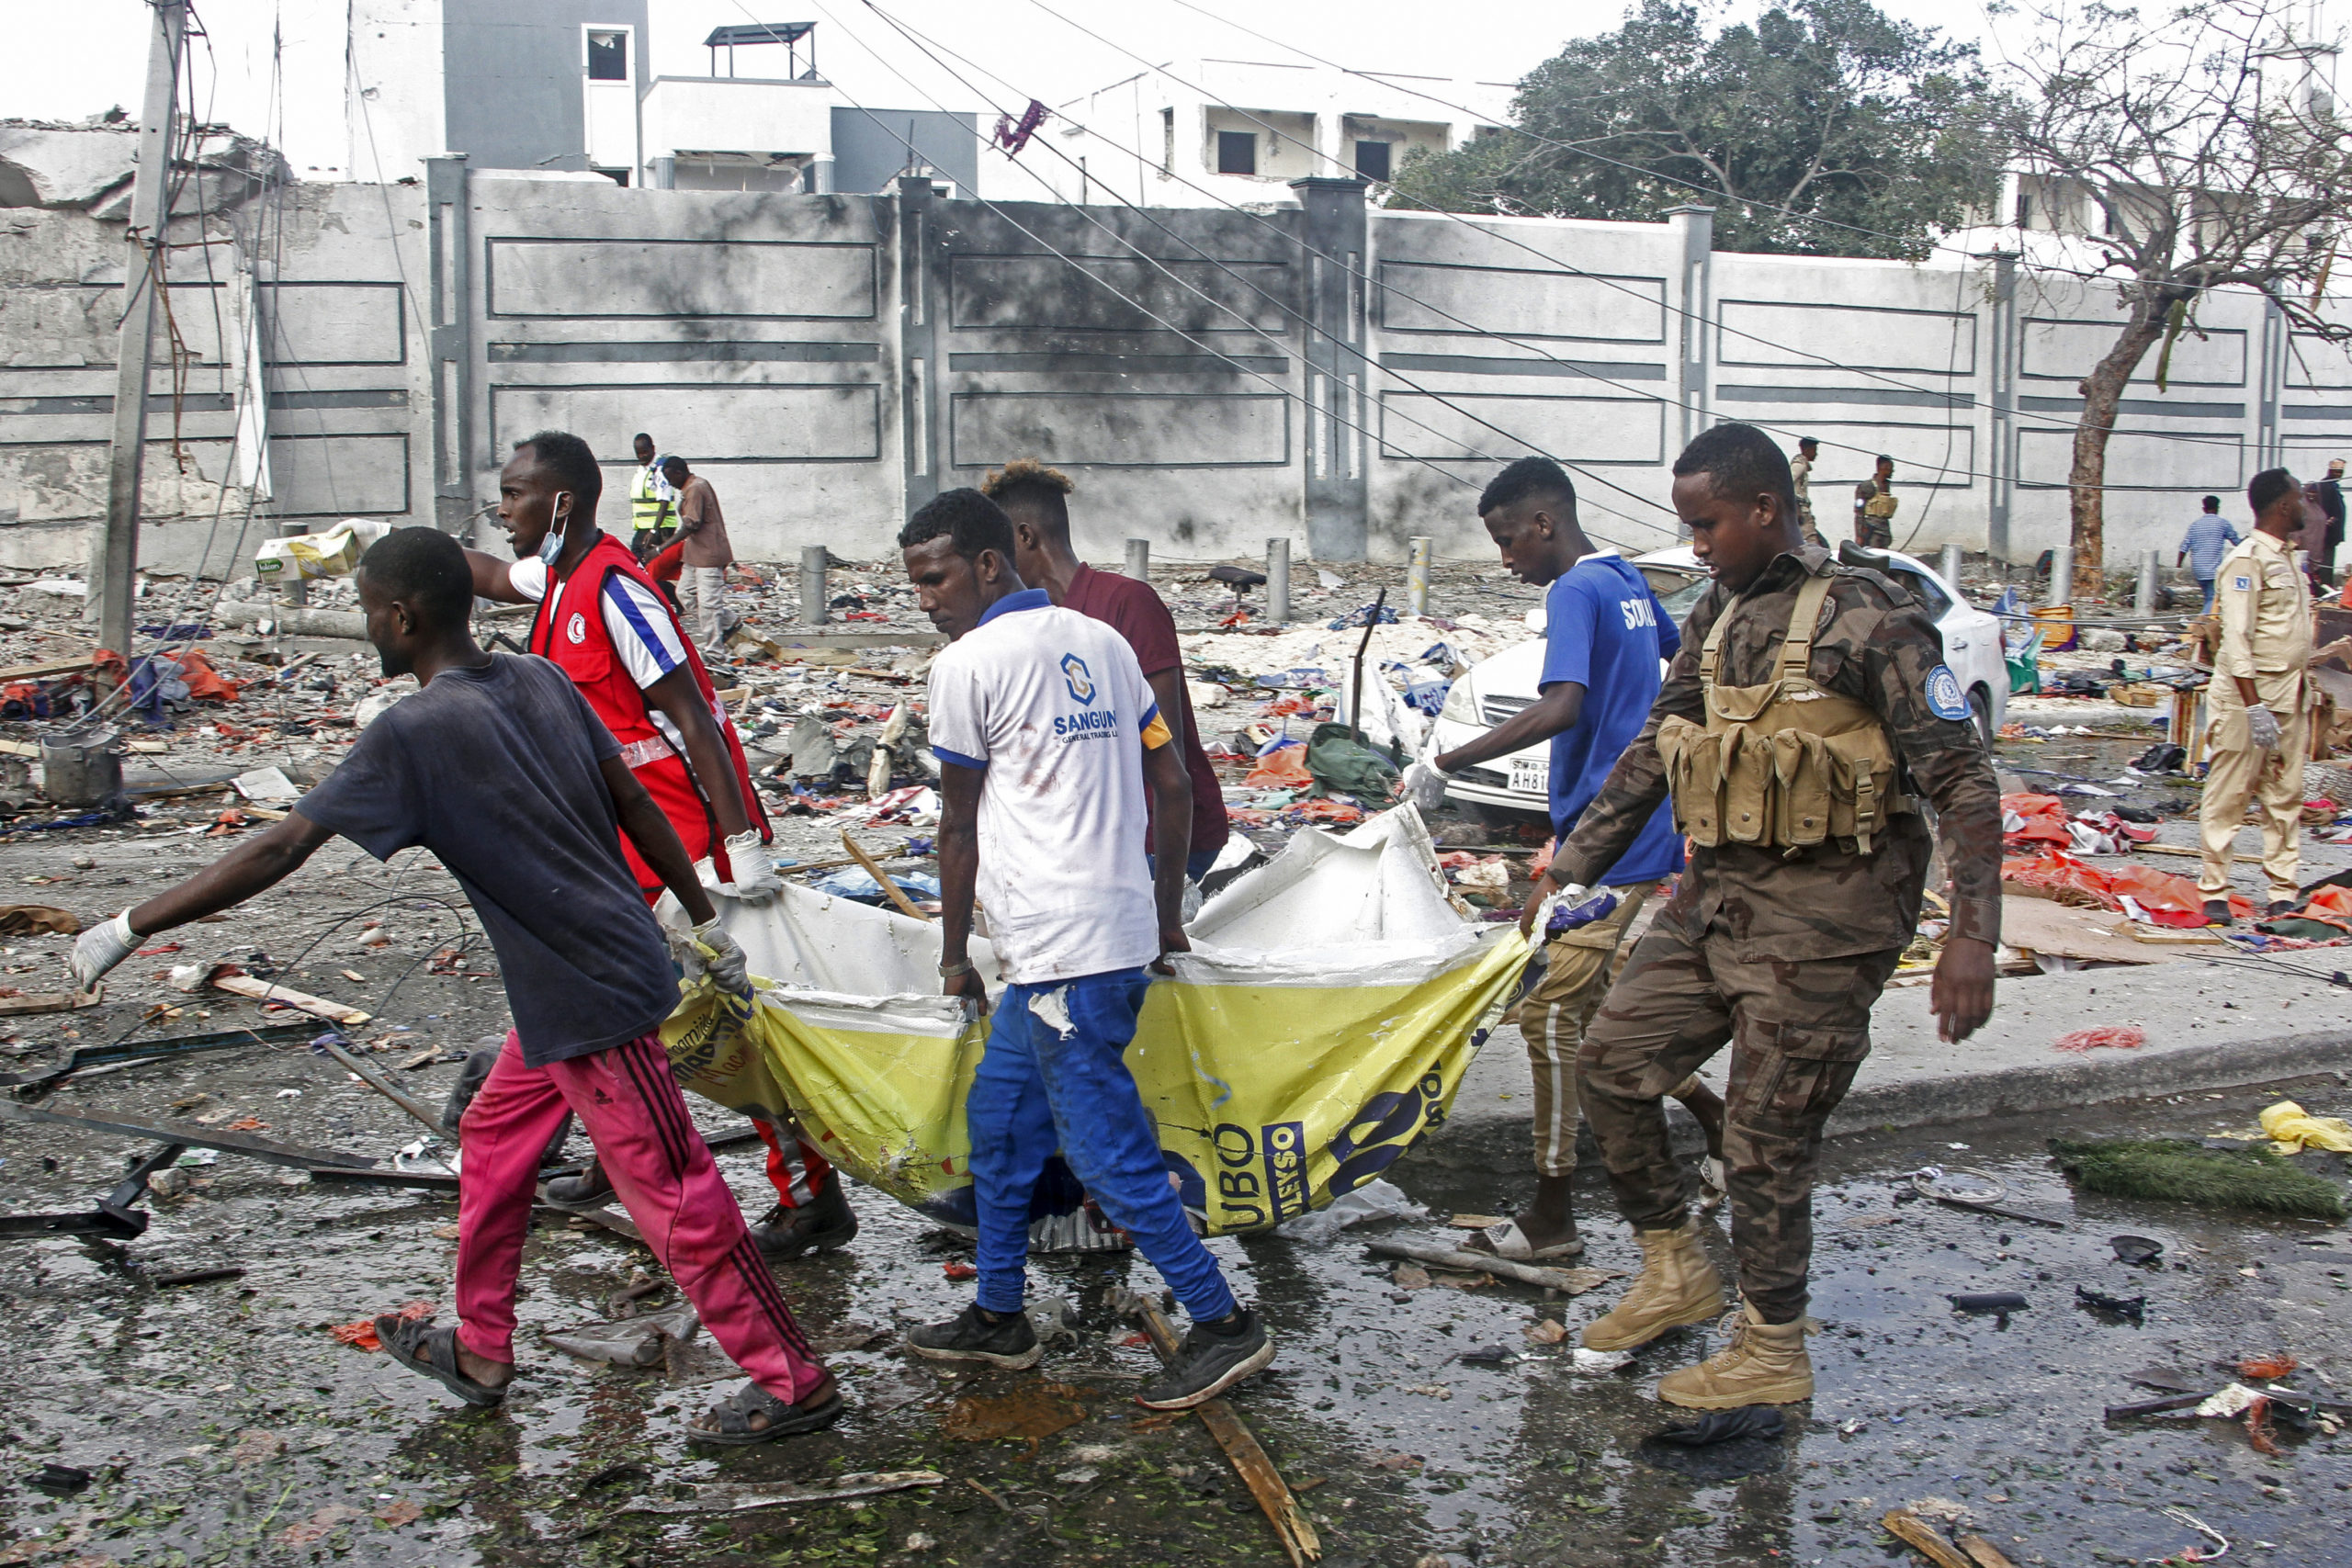 Rescuers remove a body from the scene of two car bomb attacks in Mogadishu, Somalia, Saturday. The bombs exploded Saturday at a busy junction in Somalia's capital near key government offices, leaving "scores of civilian casualties," police told state media.